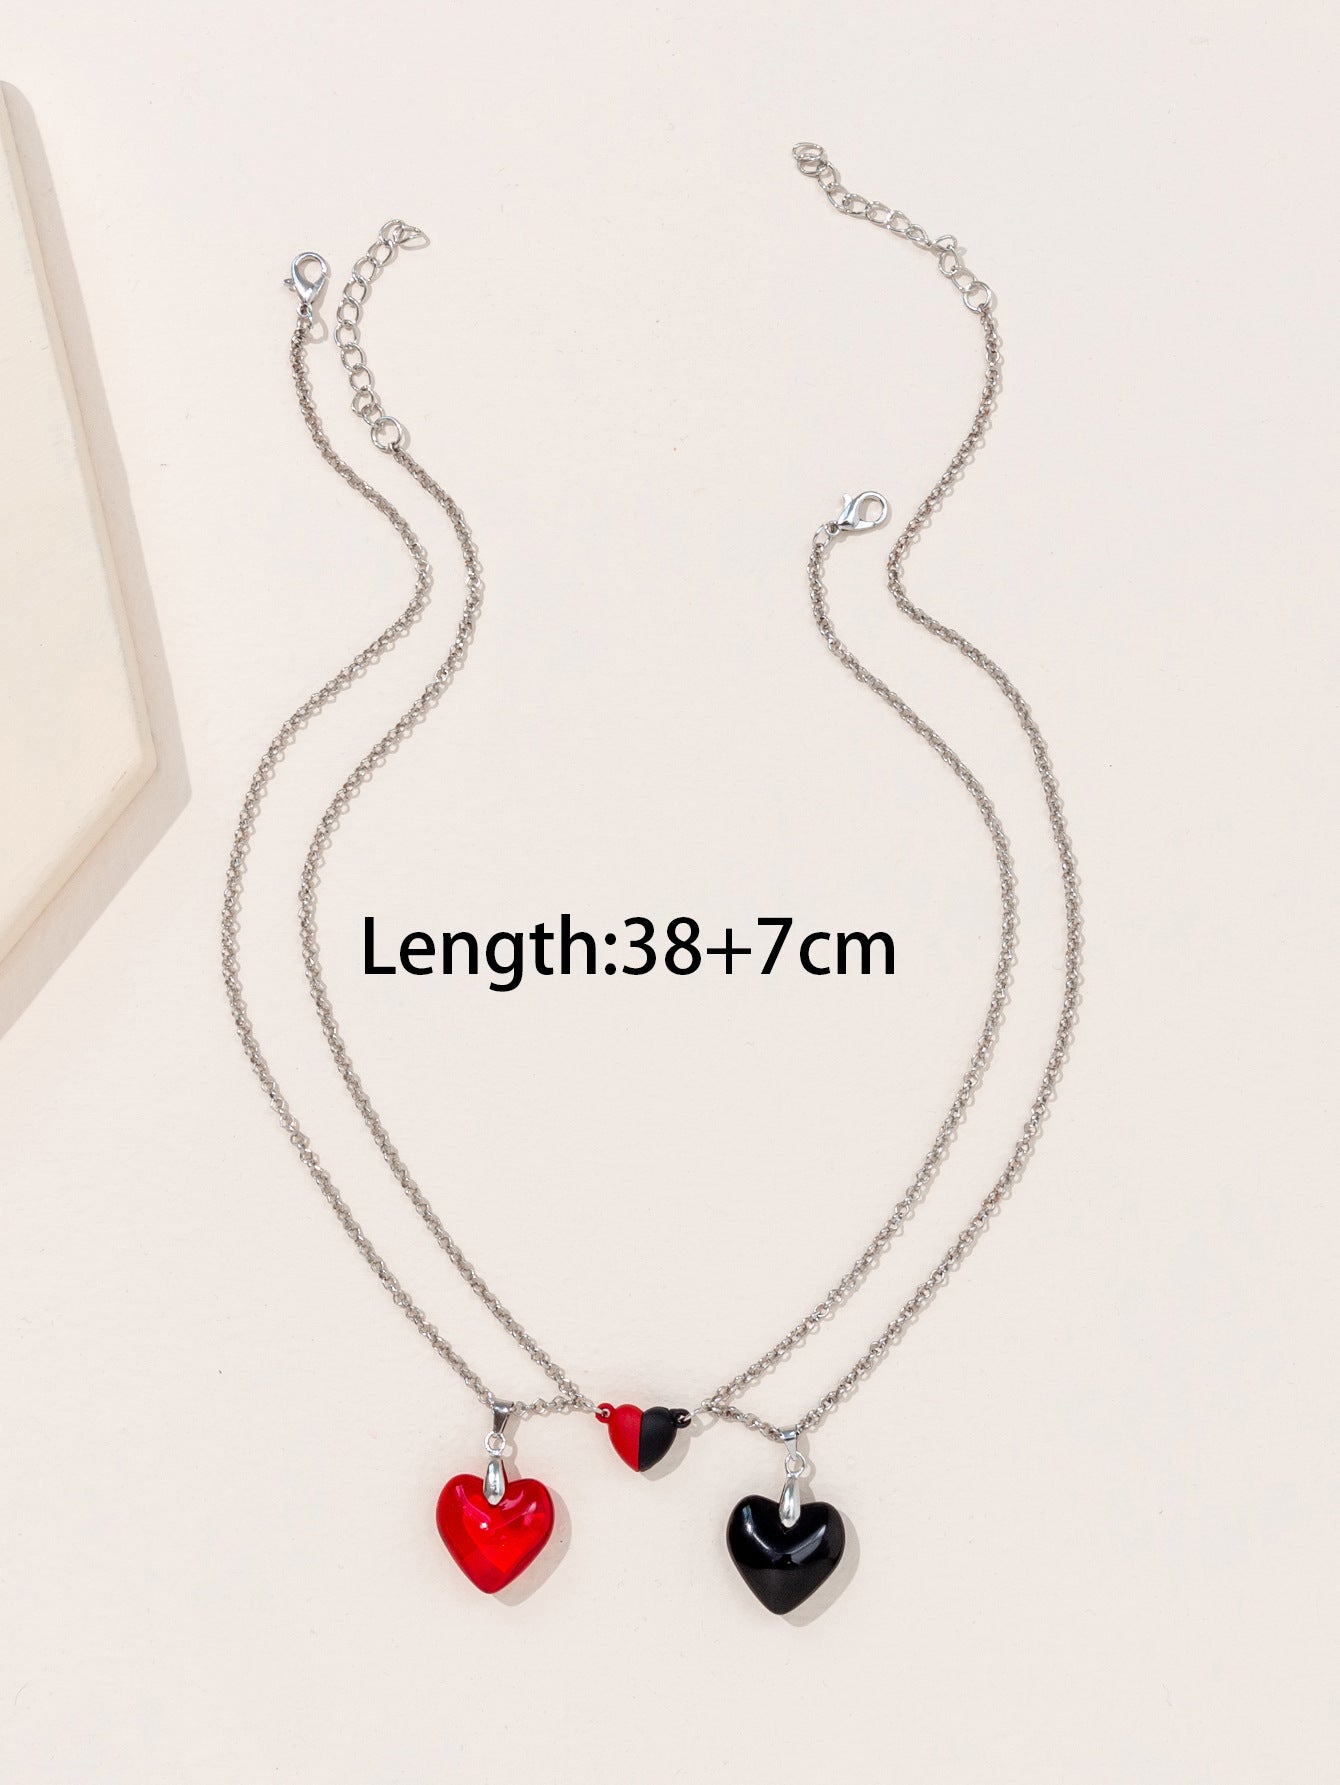 Connecting Magnetic Hearts Necklaces for Couples